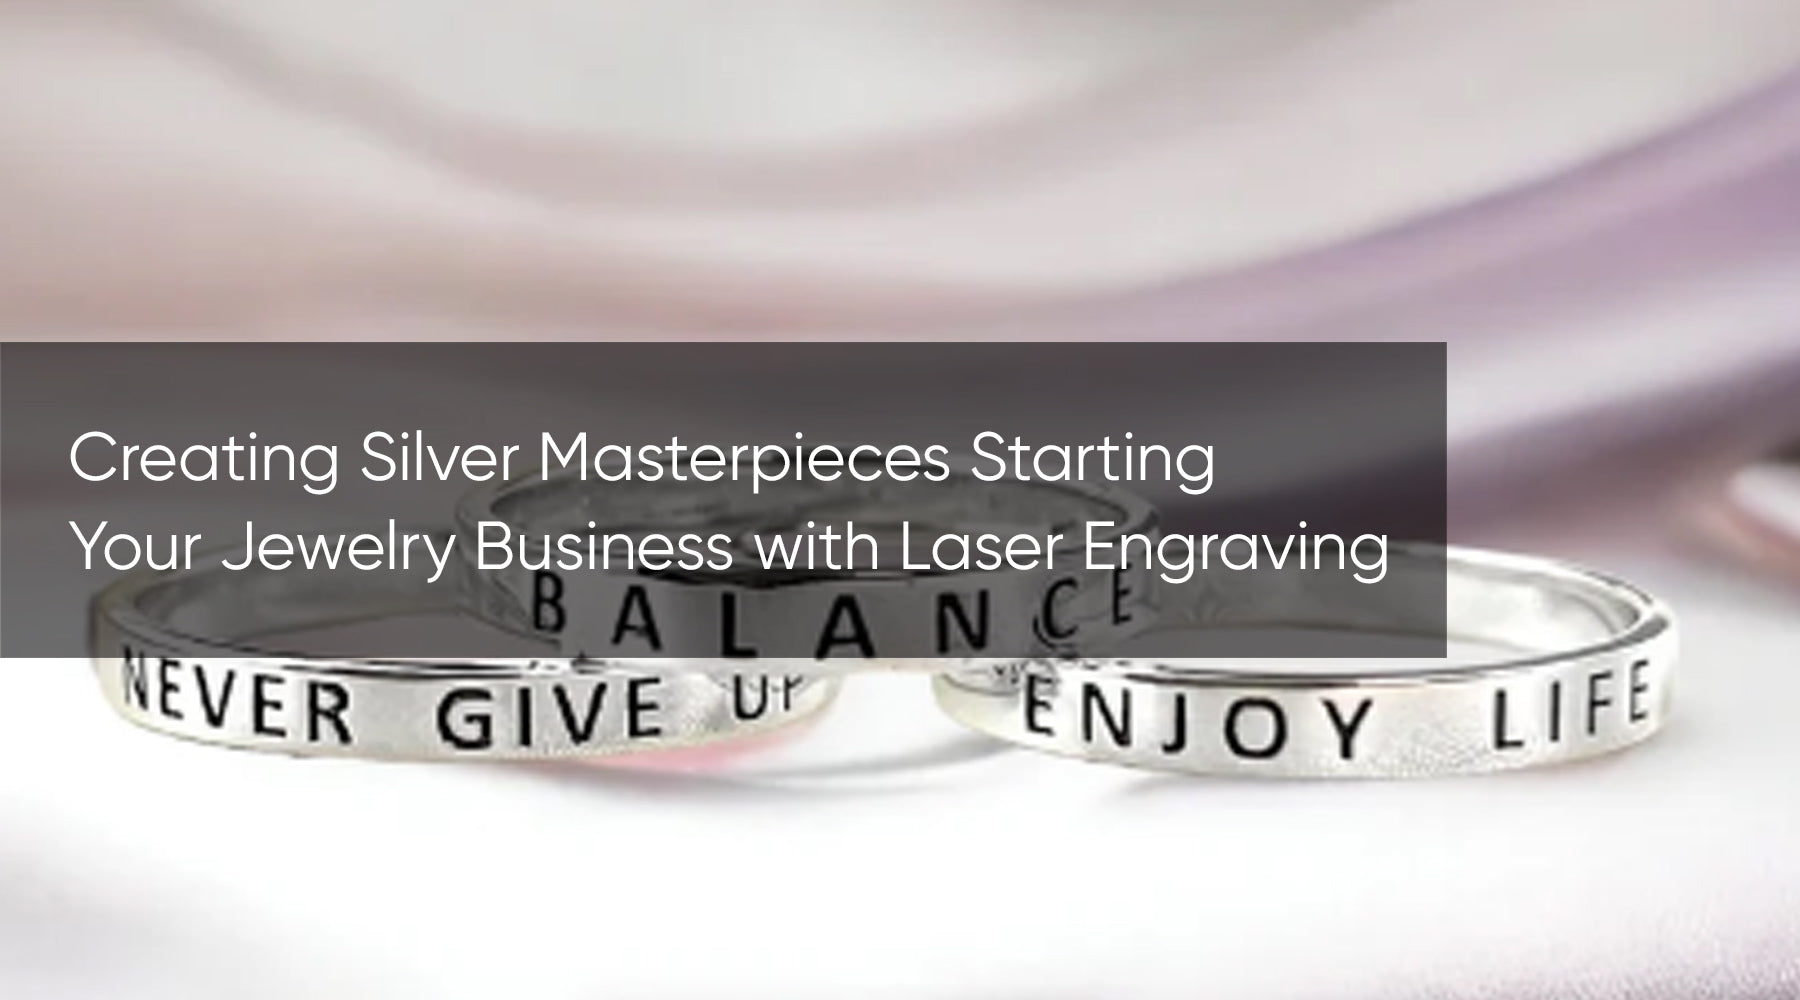 Creating Silver Masterpieces Starting Your Jewelry Business with Laser Engraving